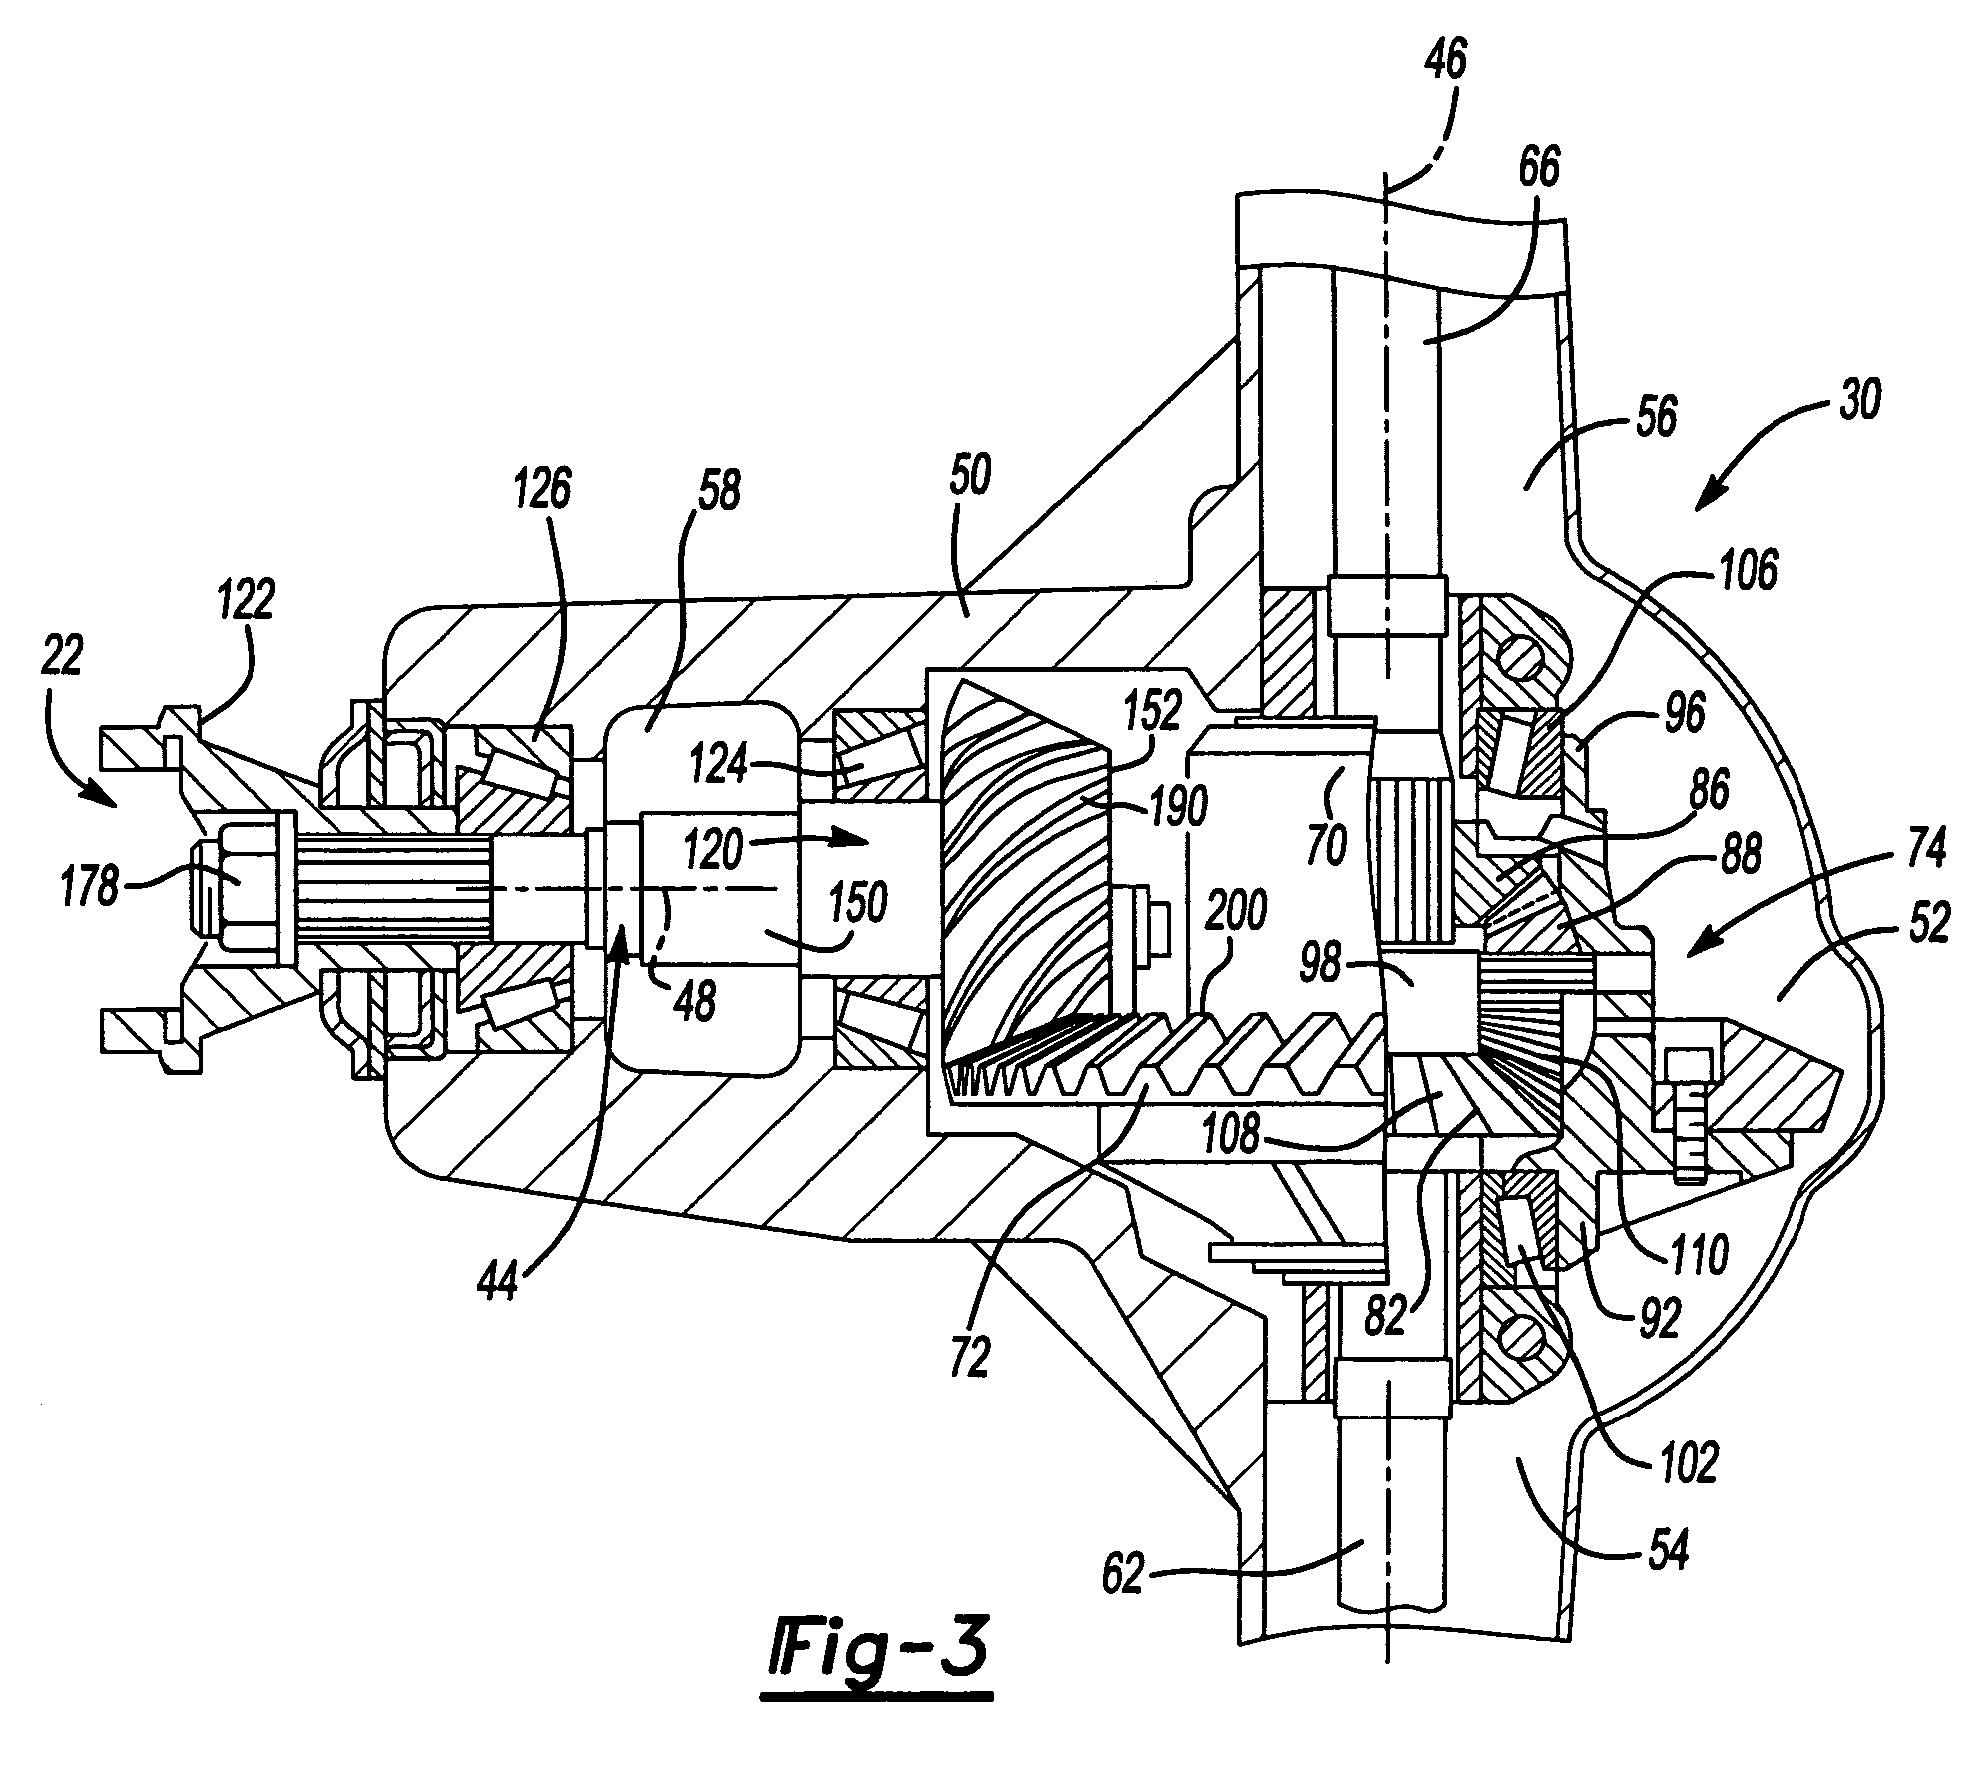 Method of manufacturing an automotive differential having an input pinion